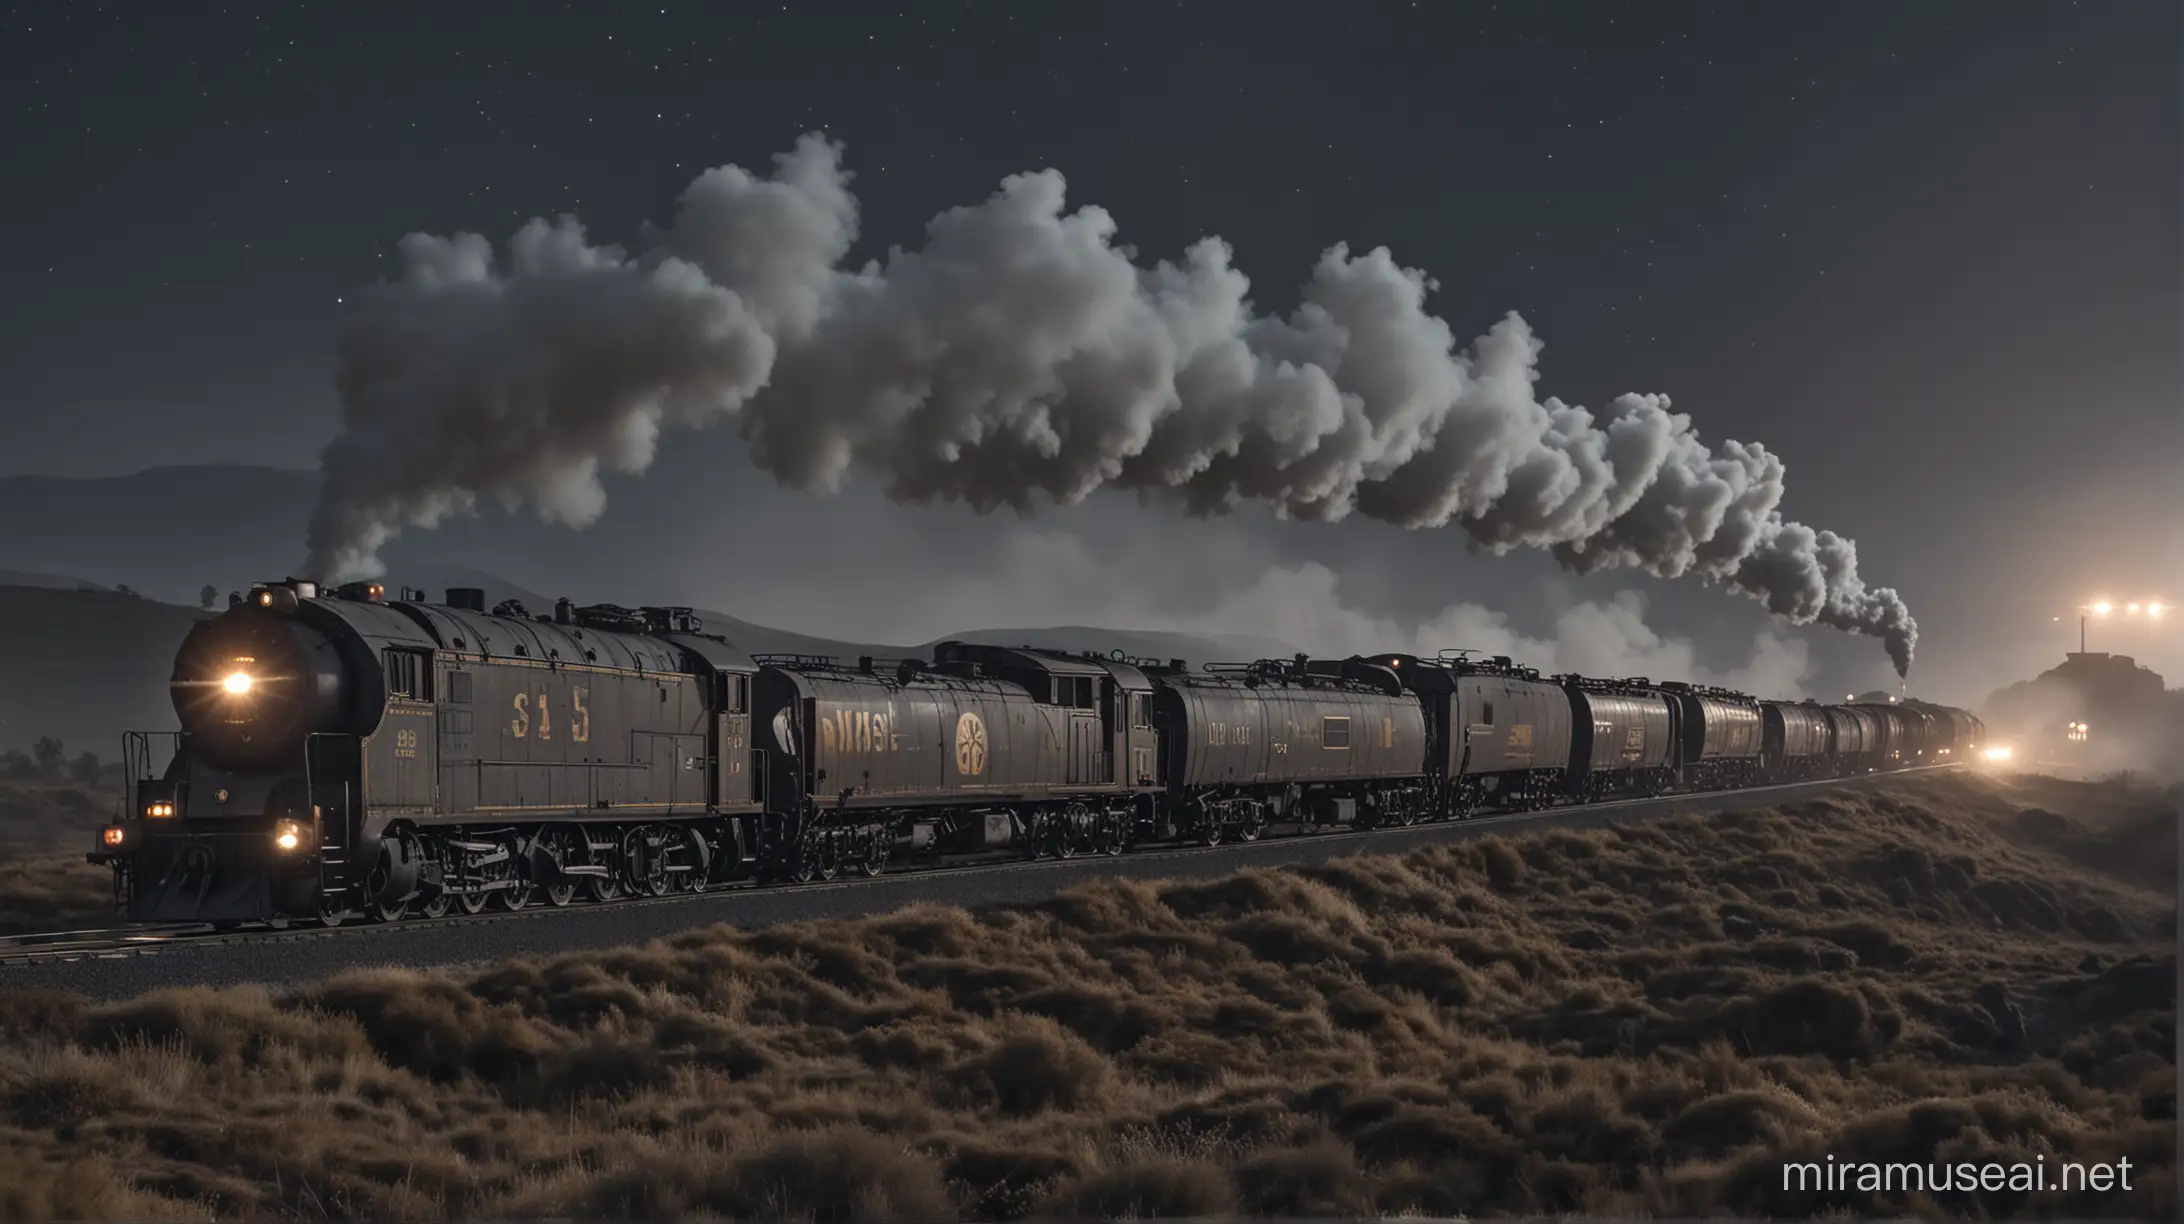 very long steampunk train being towed by three steampunk diesel locomotives runs through the rangy terrain. distant view from a high hill. almost dark. stars are visible. much steam and smoke.